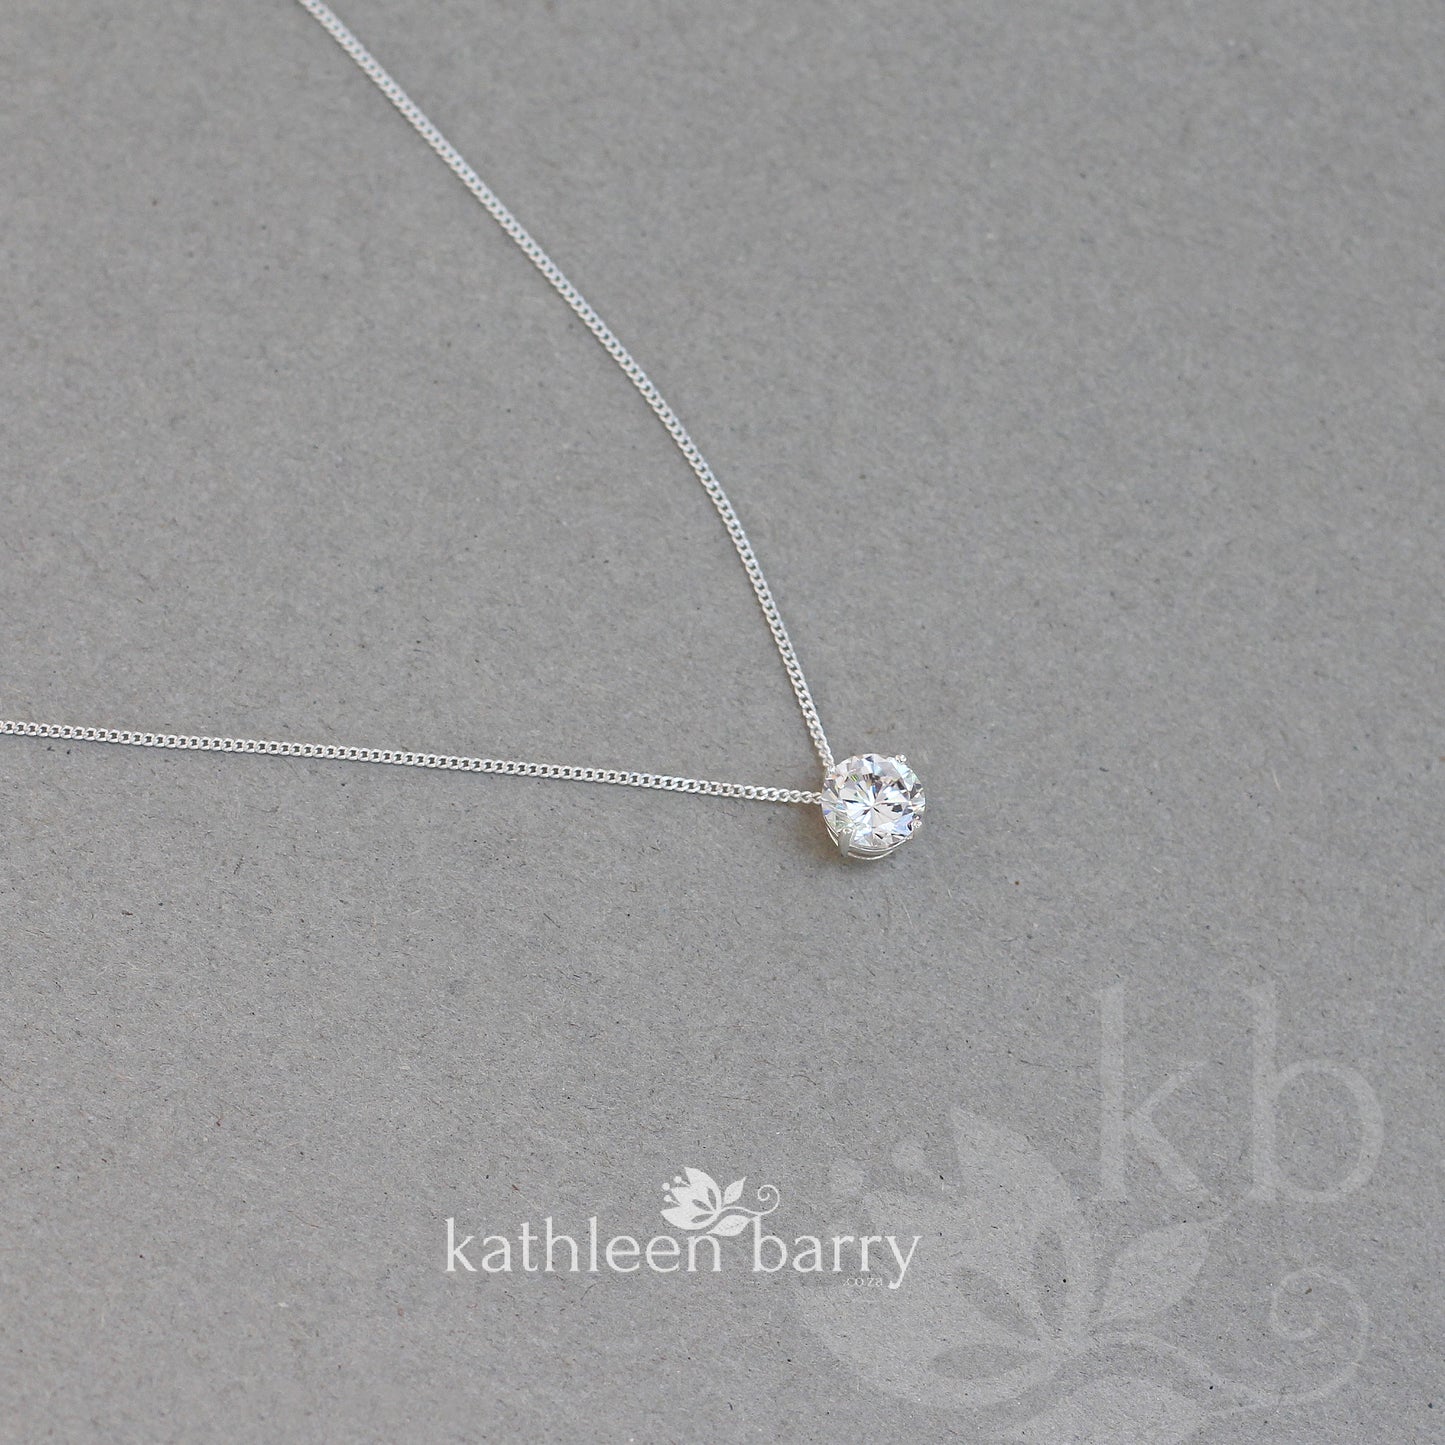 Cubic zirconia single floating gem pendent on a sterling silver chain - two length options